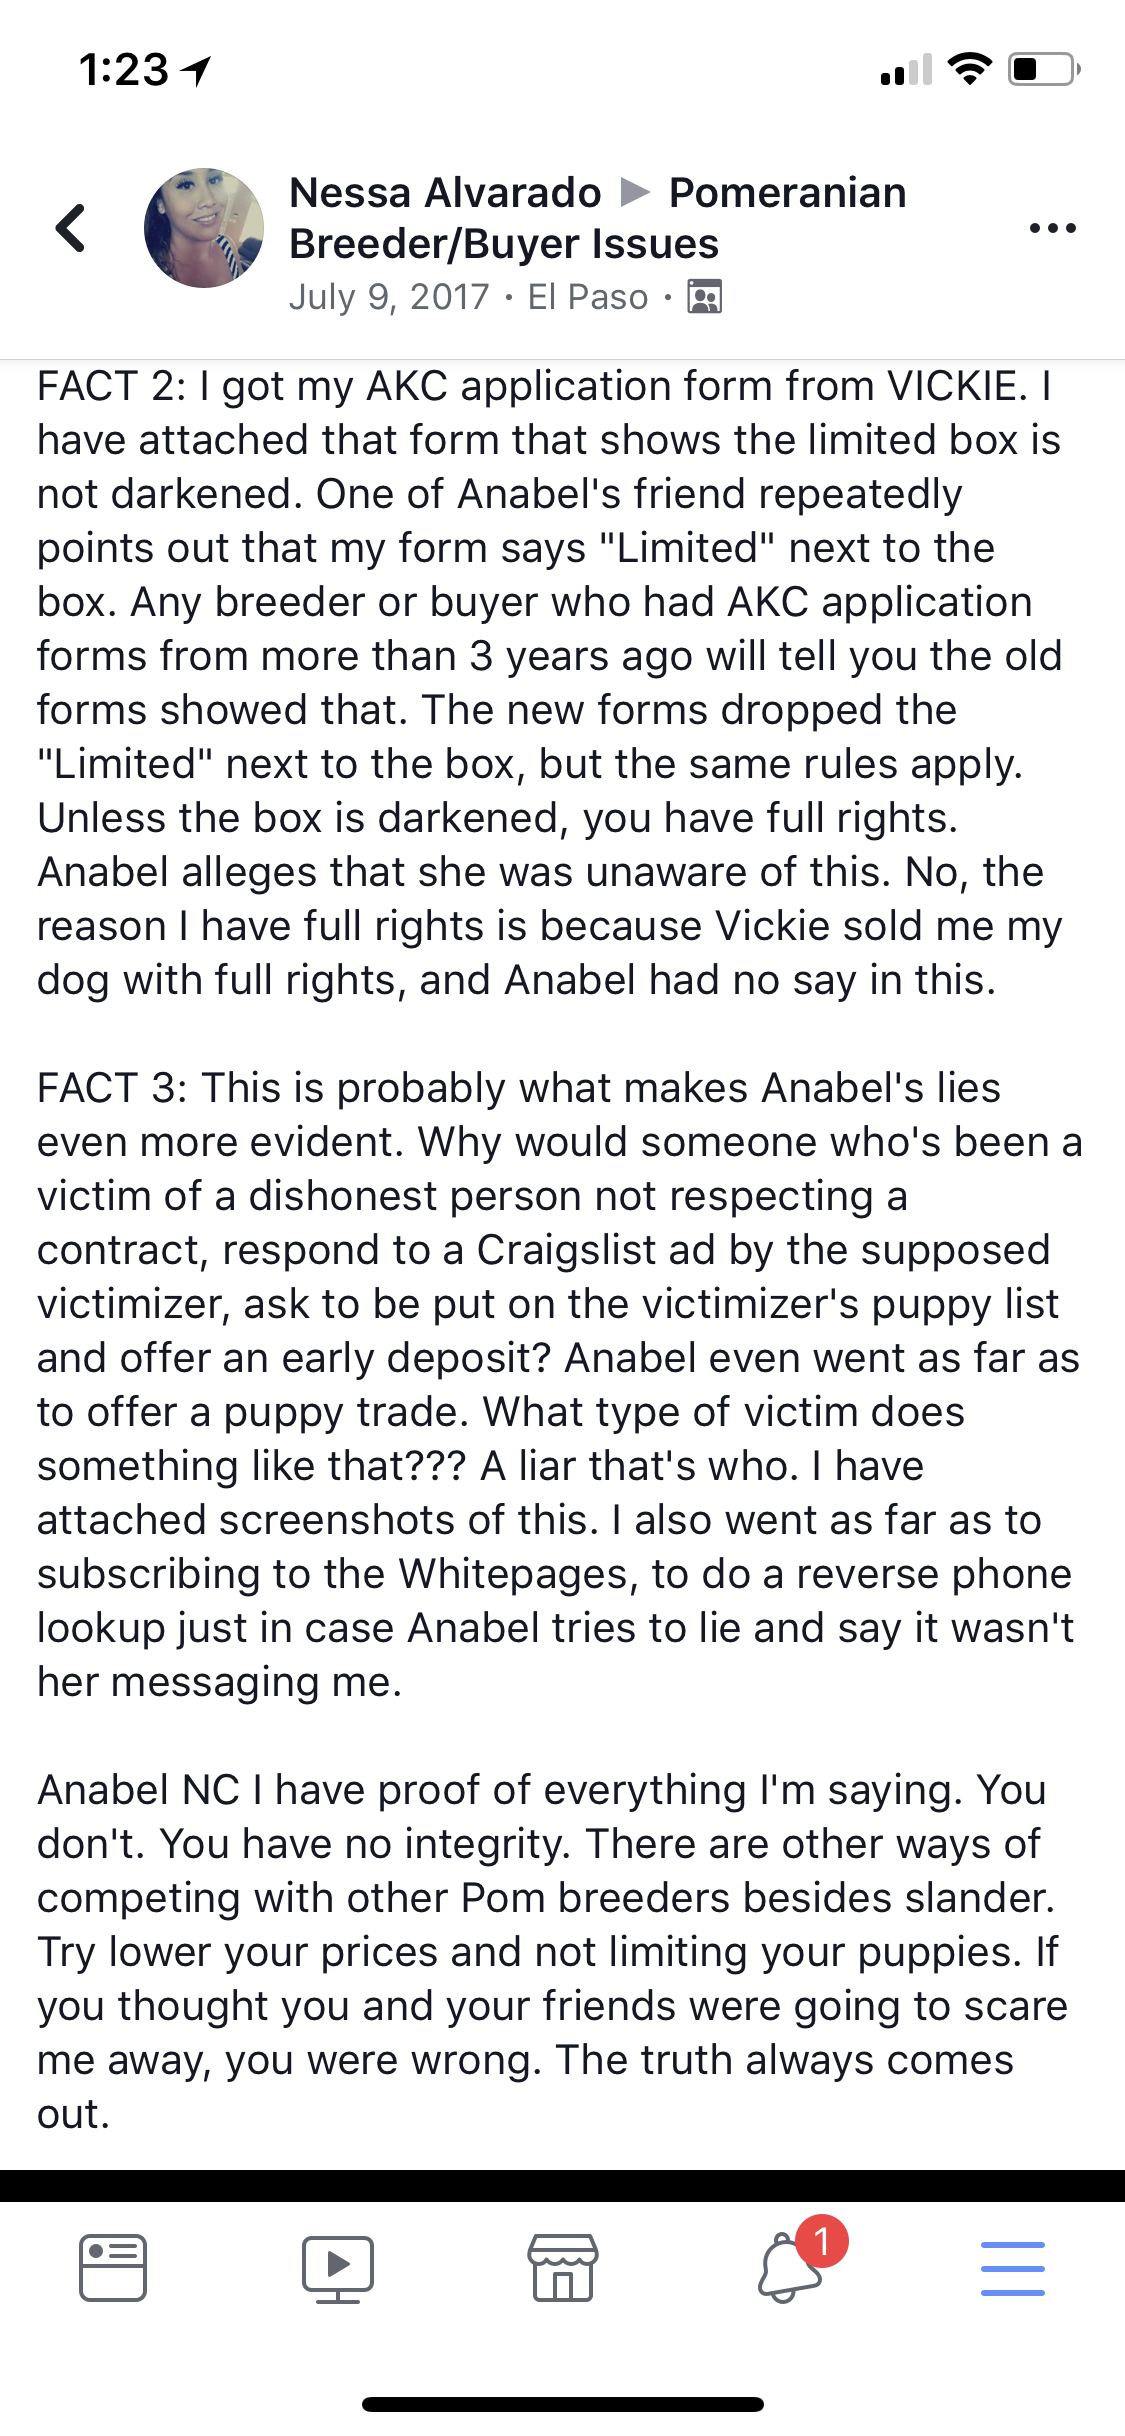 Another victim of Anabel Castro